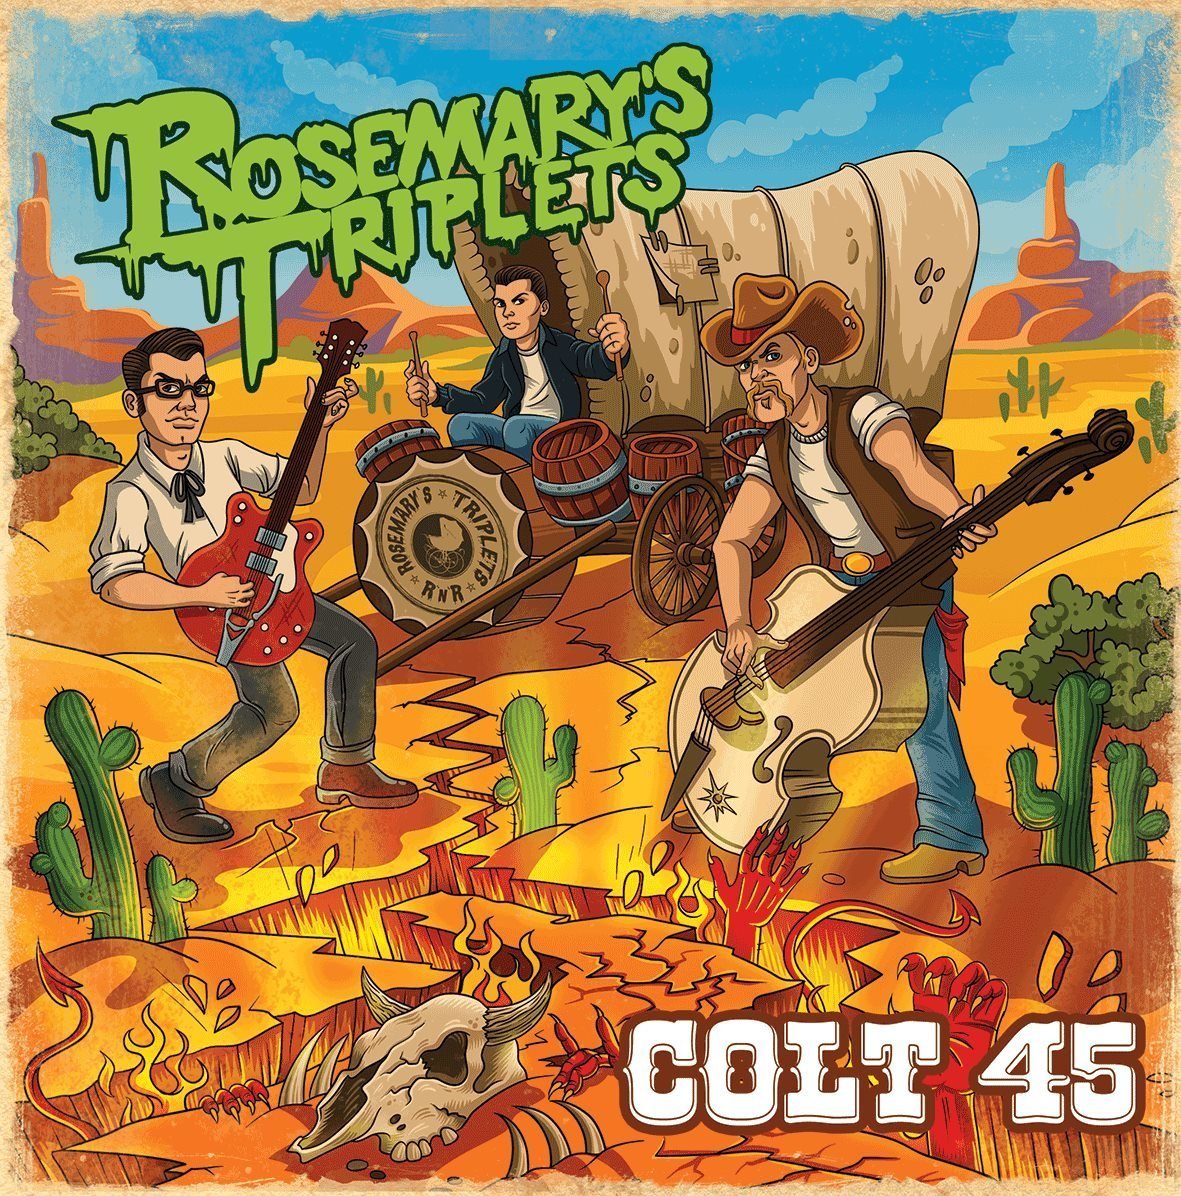 SINGLE - Rosemary's Triplets - Colt 45 (7" Single) - Limited RED TRANSPARENT